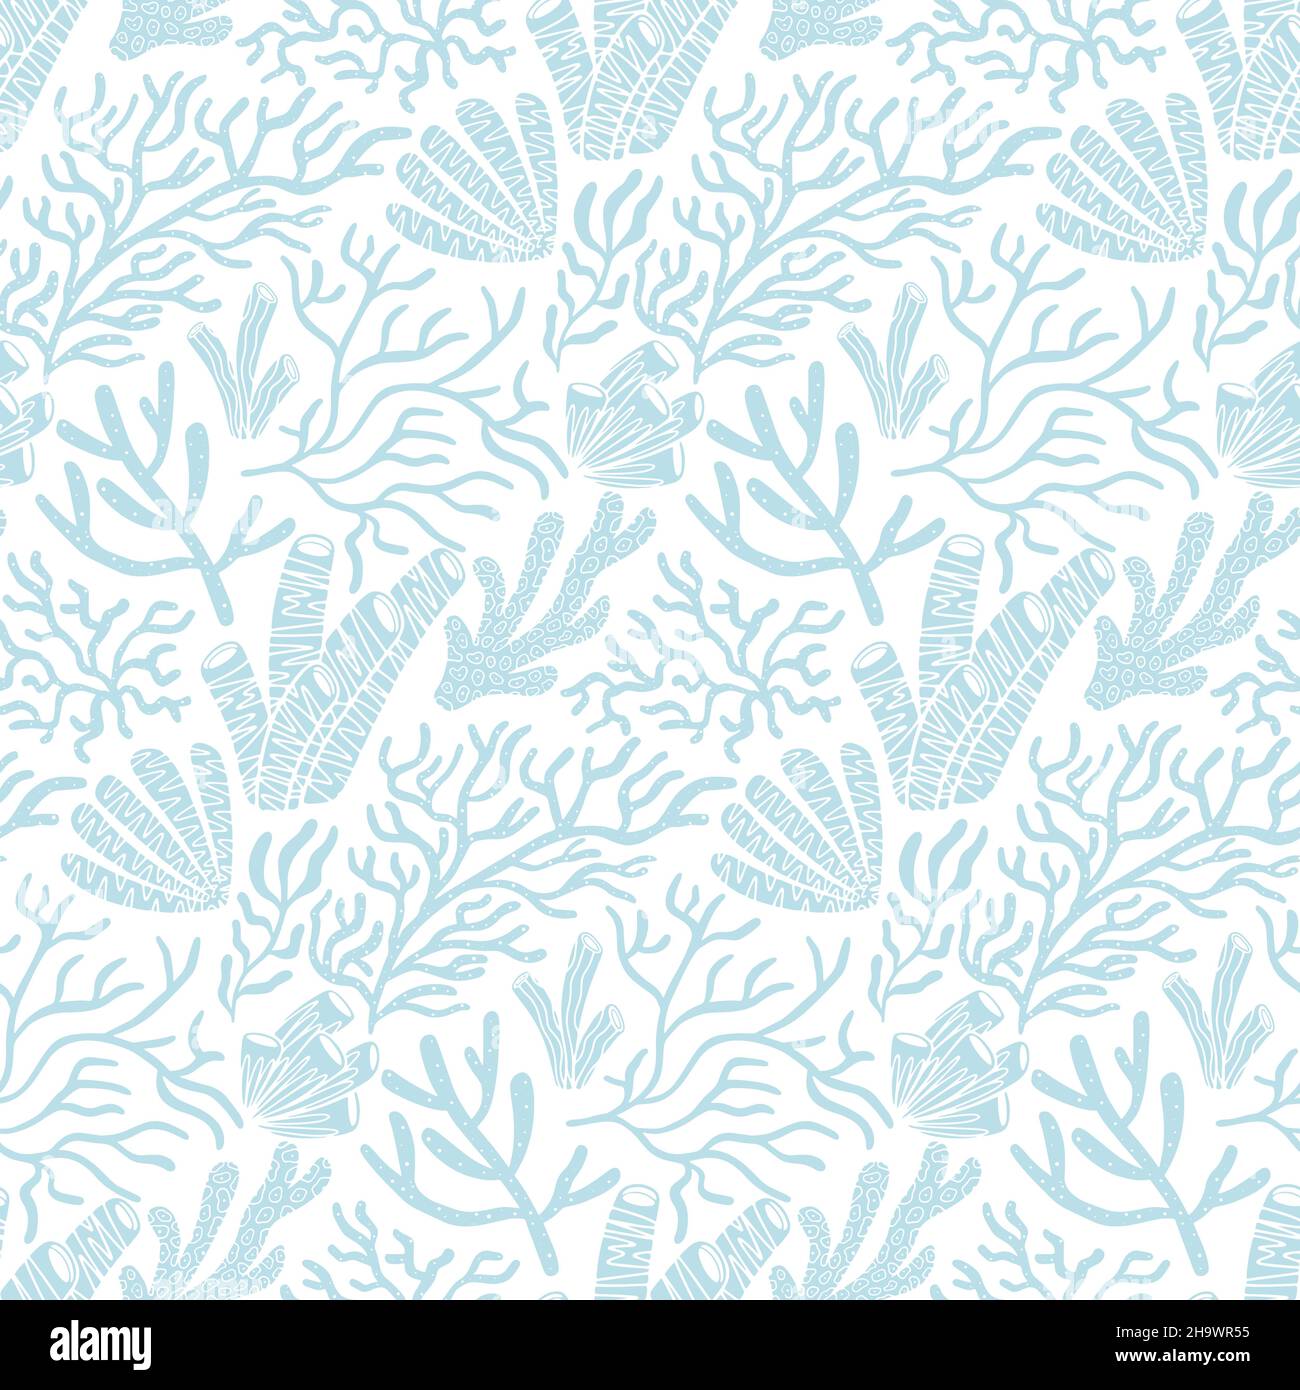 Awesome Cute Vintage Coral Reef Vector Seamless Pattern Design Stock Vector